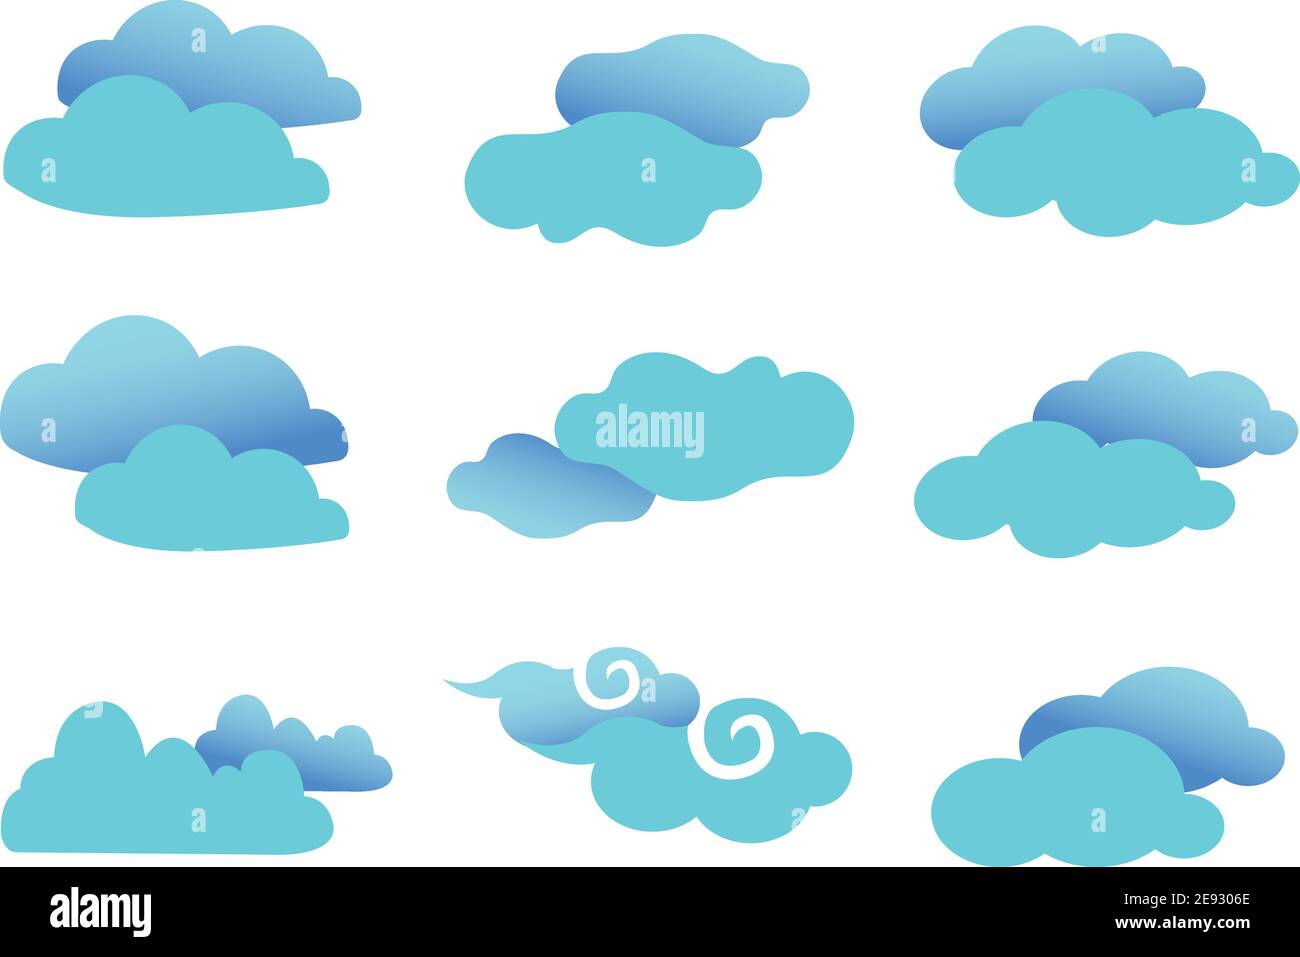 Set of nine vector illustration of fancy clouds in cyan blue with ...